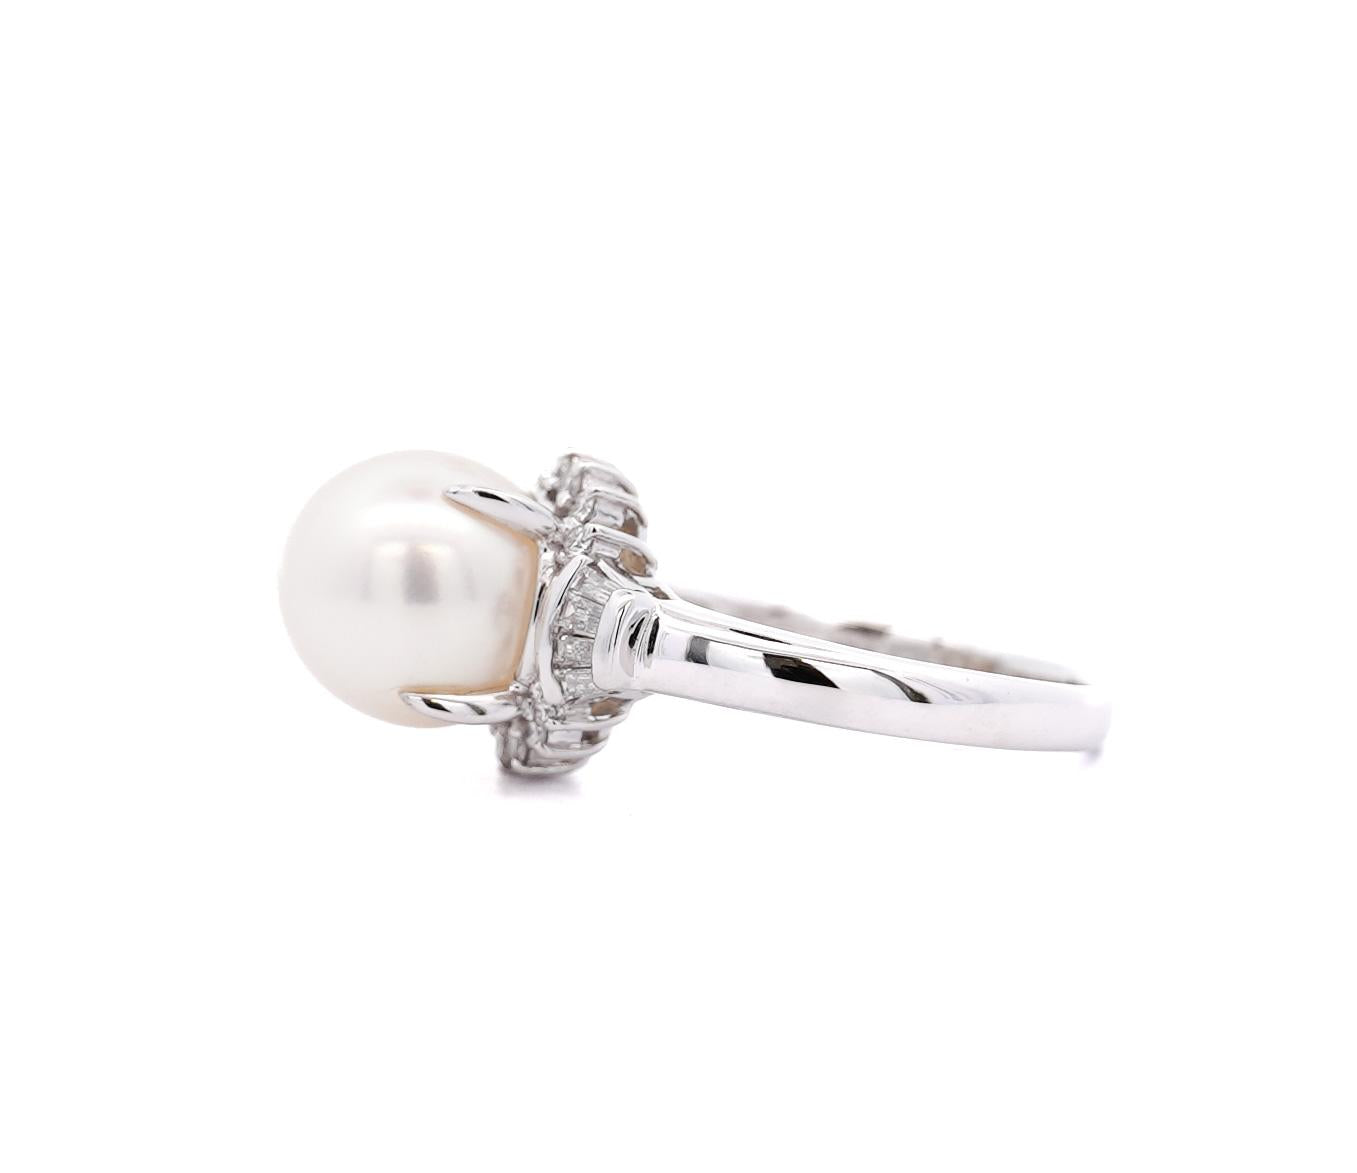 9.5mm South Sea White Pearl and Baguette Diamond Ring in Platinum